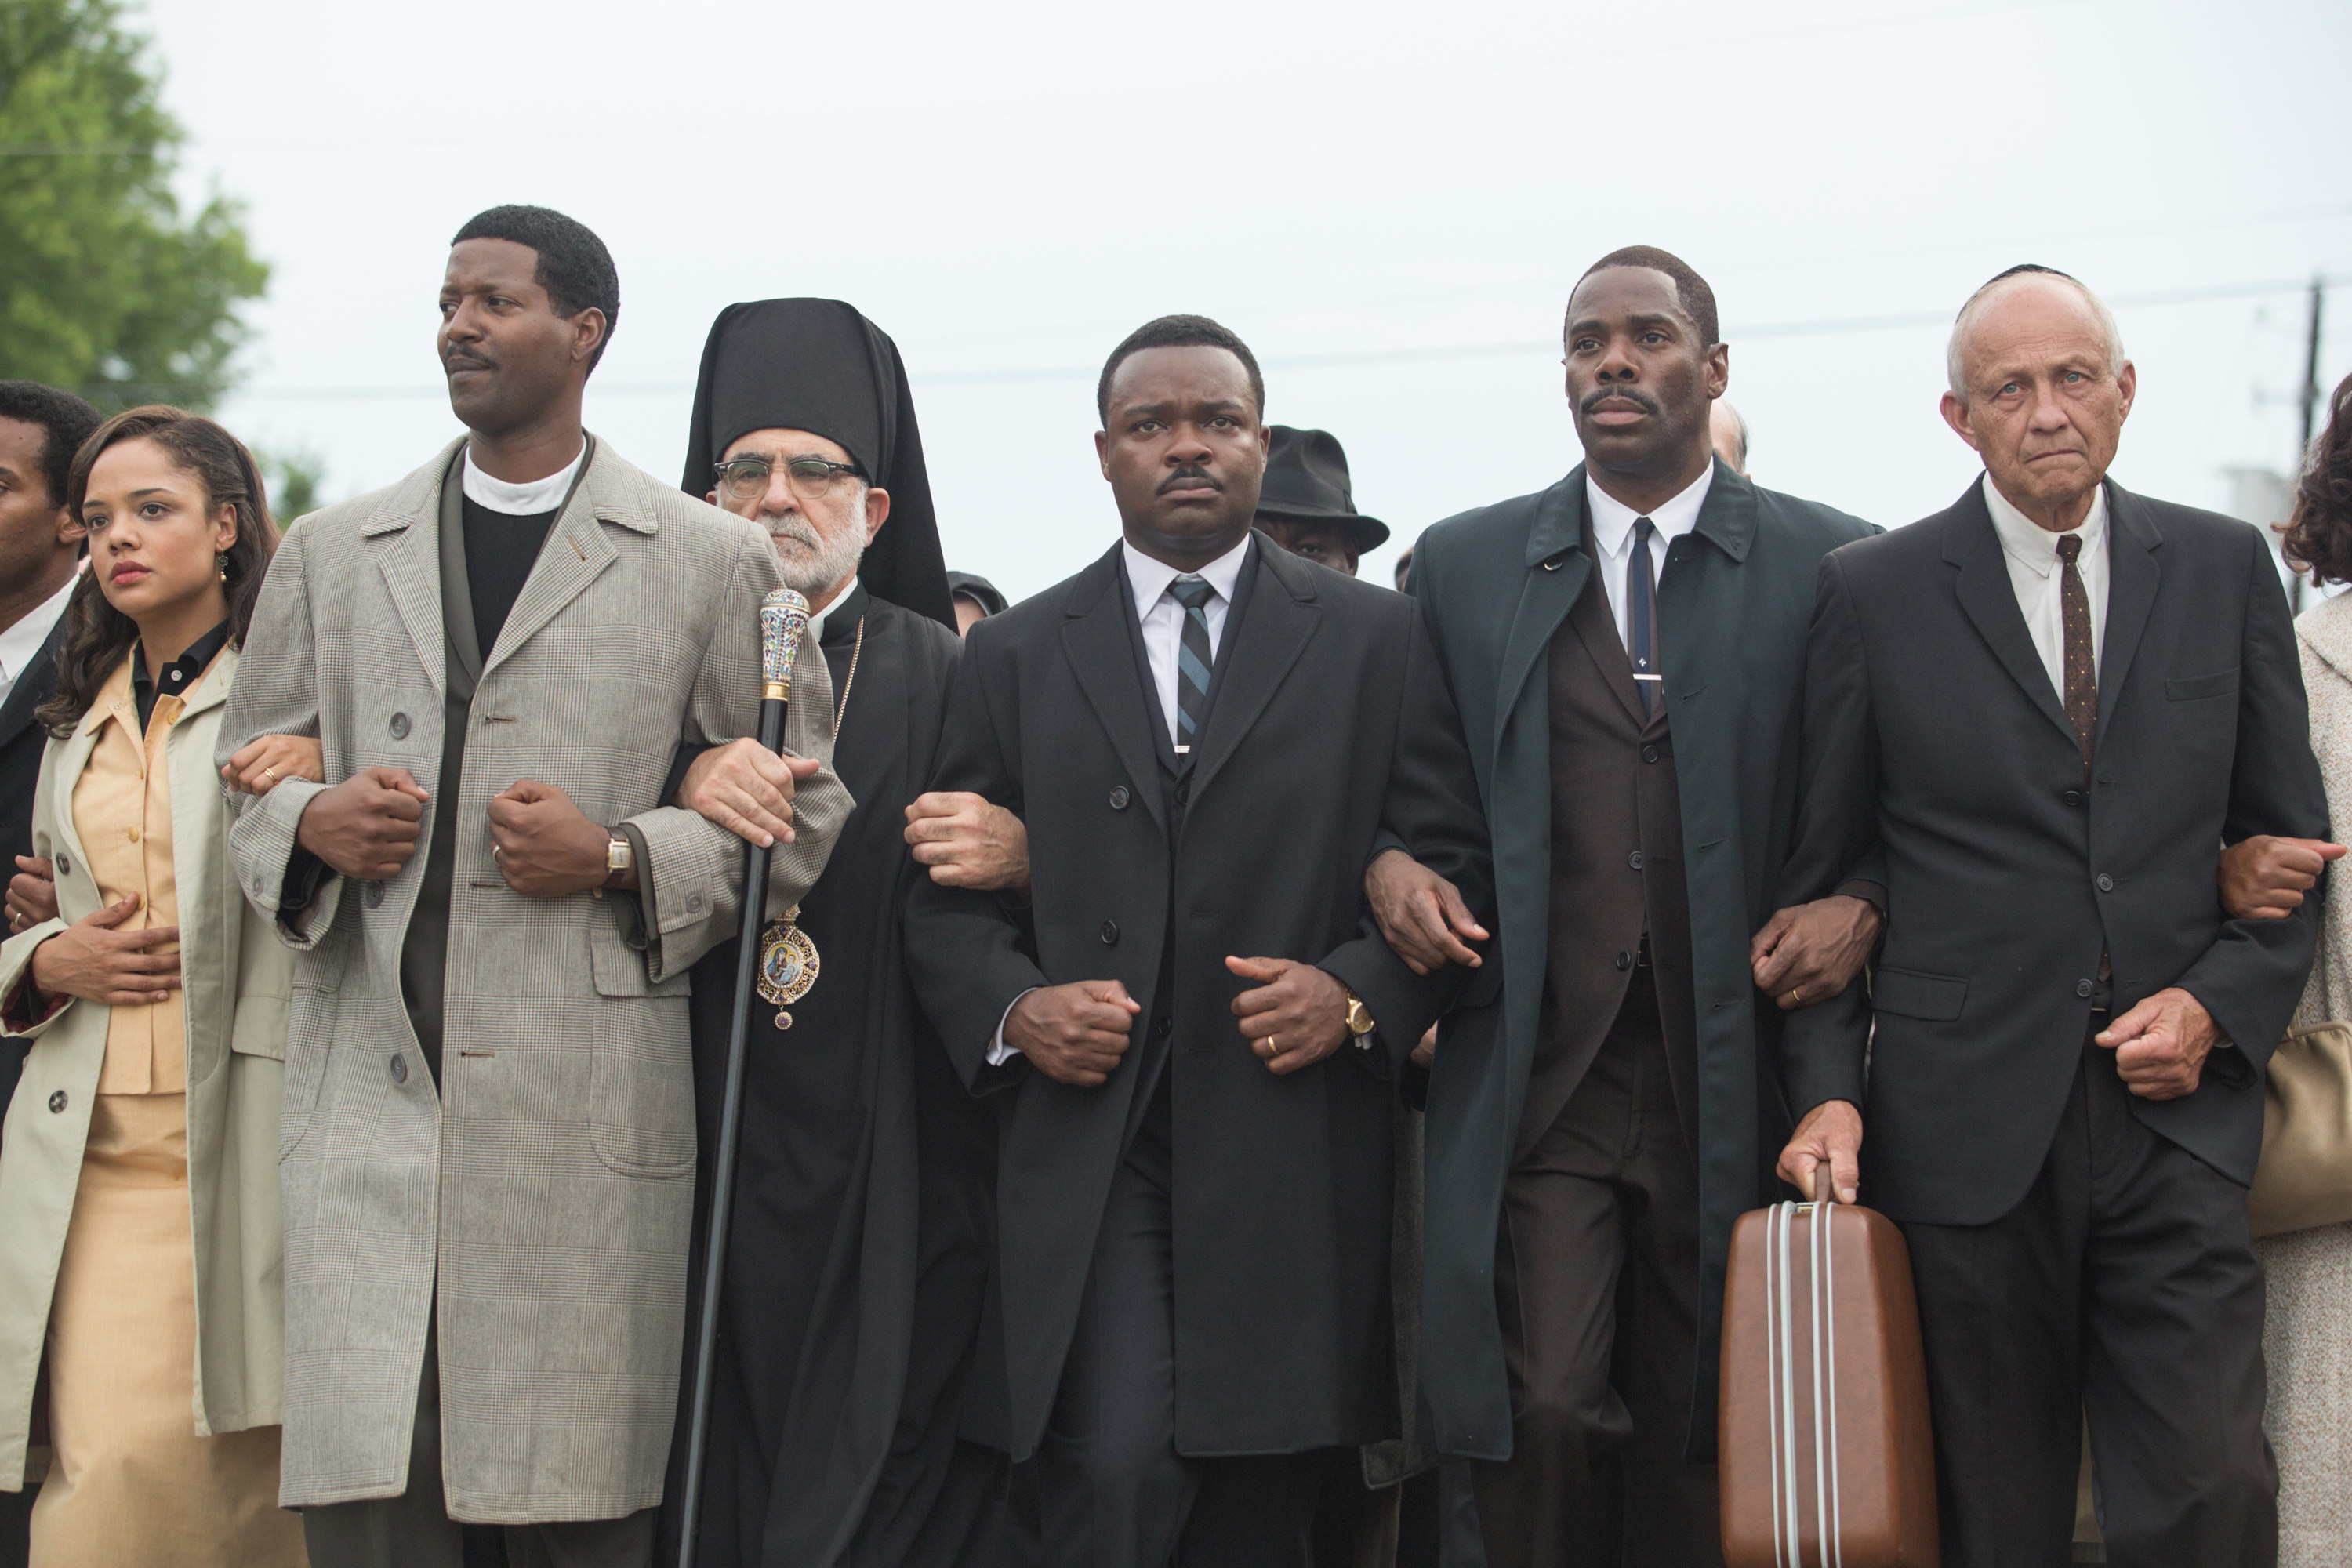 In a scene from Selma, the ministers lead the march, arm in arm